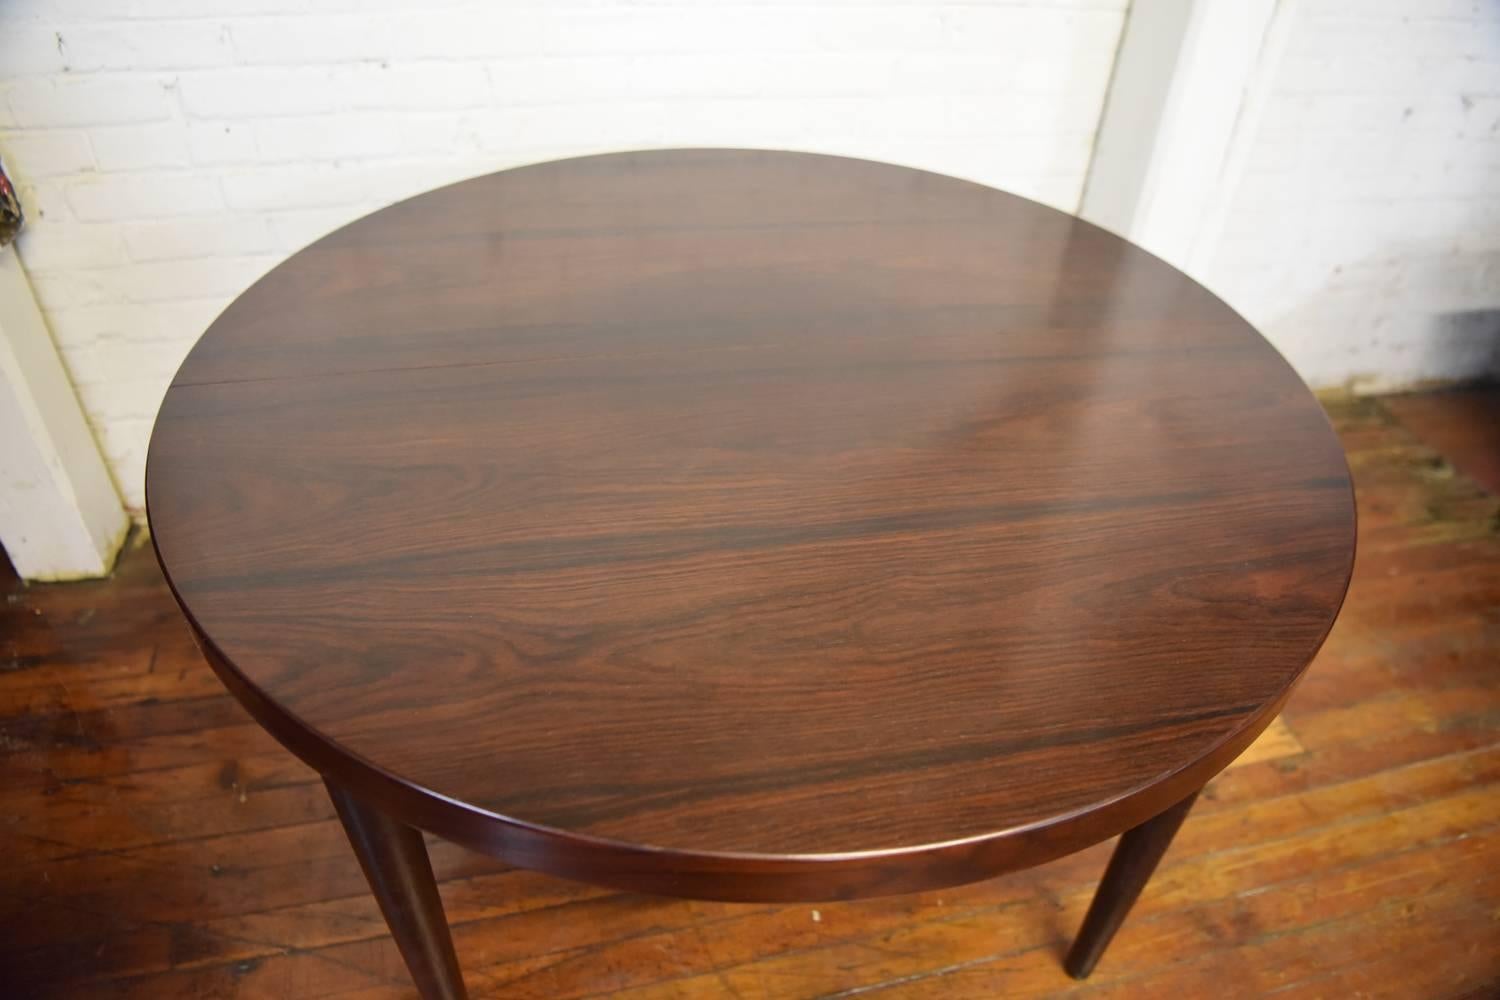 A beautiful Danish Mid-Century rosewood dining table designed by Kai Kristiansen for Skovmand & Andersen in the 1960s.